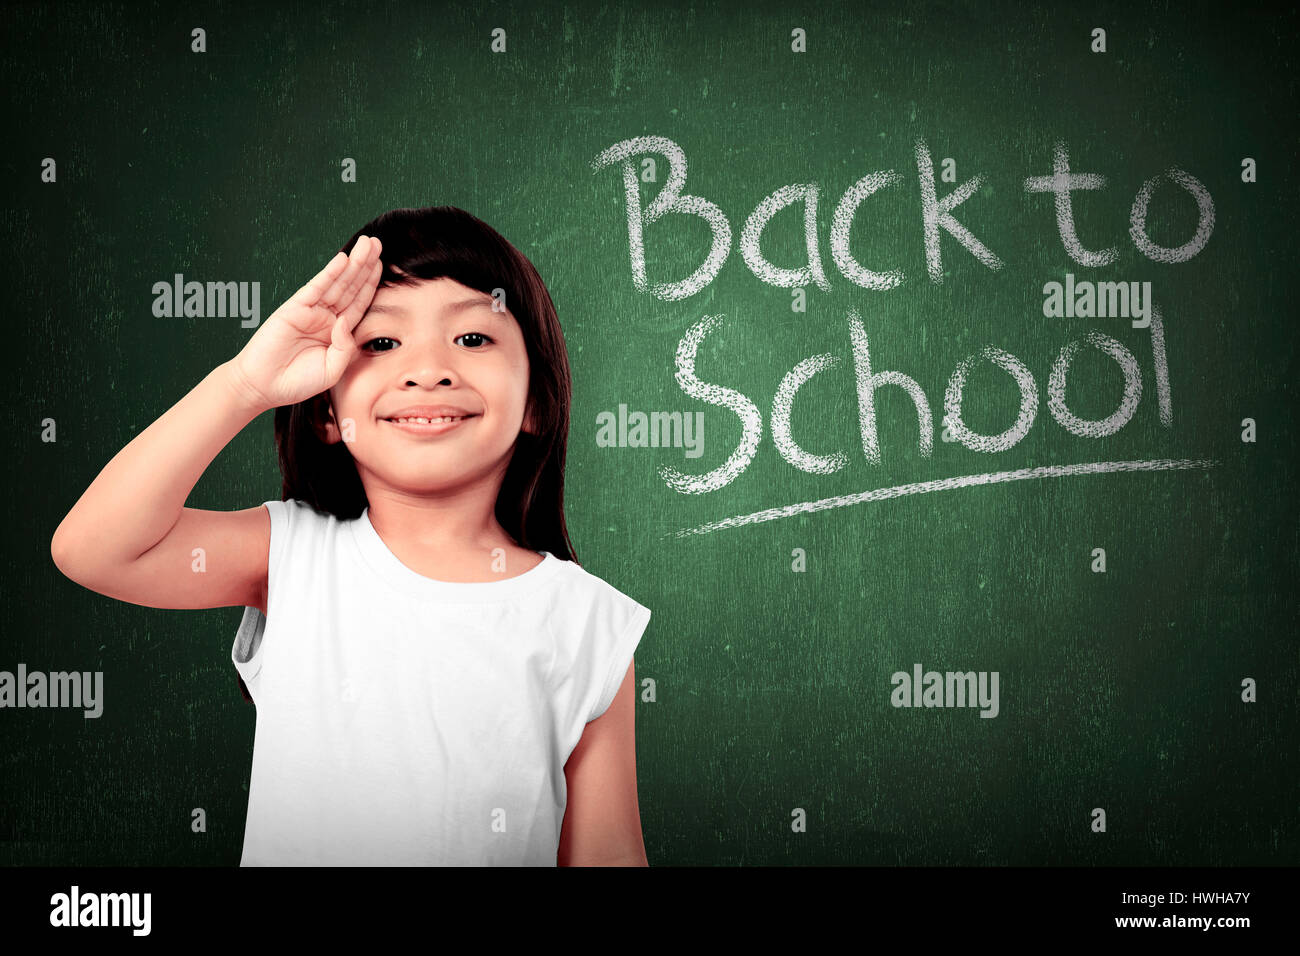 Cheerful smiling little girl on chalkboard background. Looking at camera. Back to school concept Stock Photo